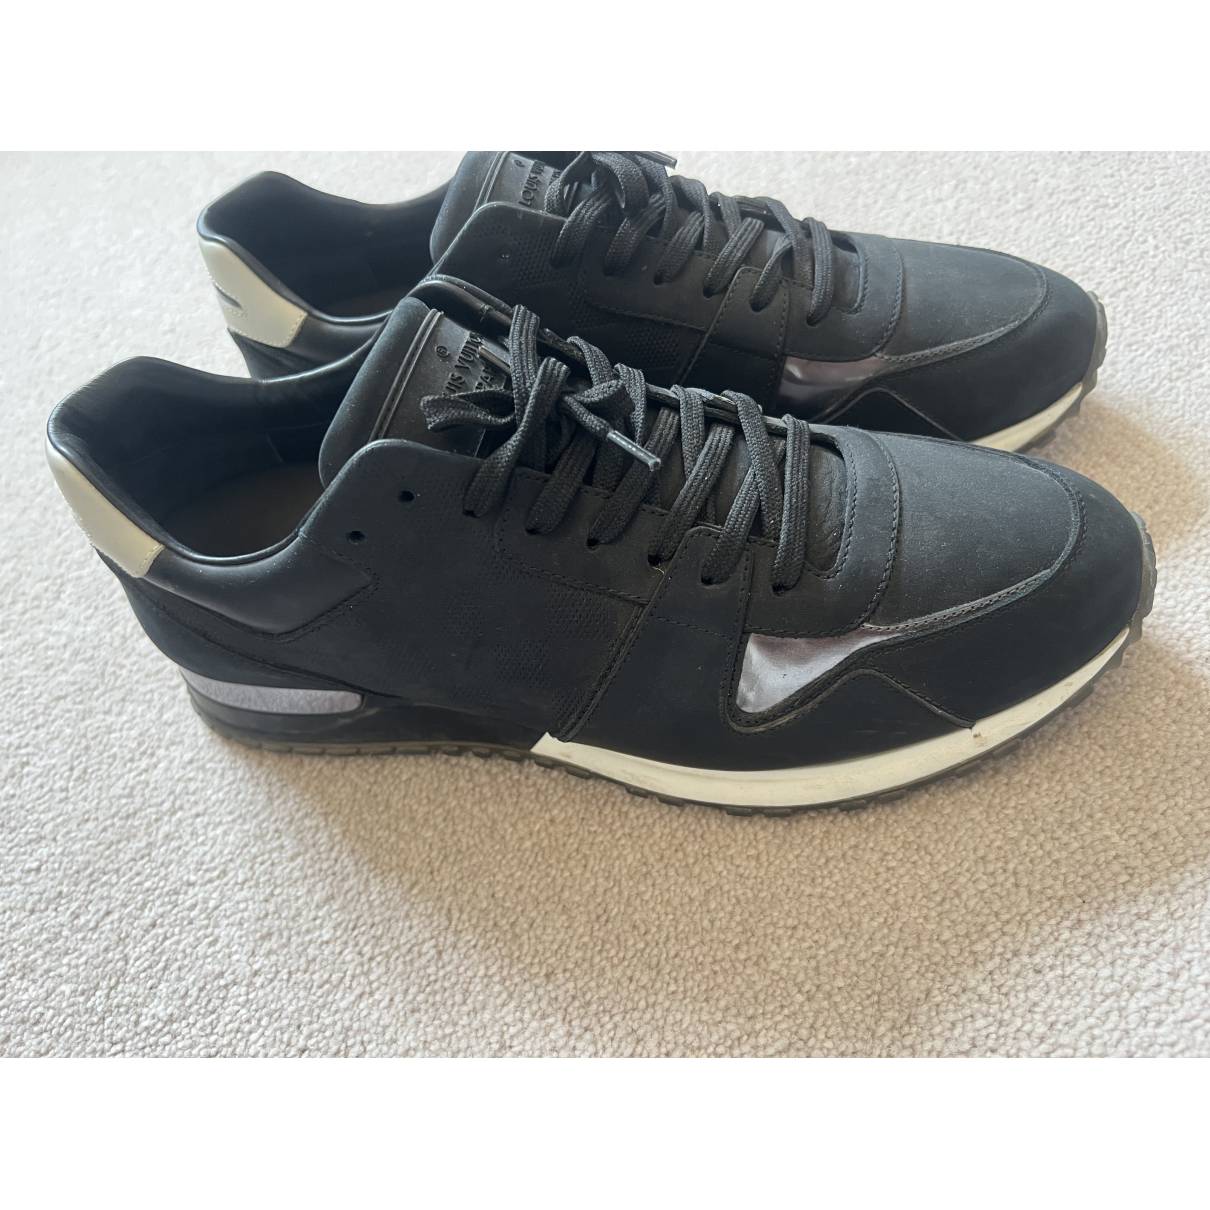 Lv runner active leather low trainers Louis Vuitton Black size 8